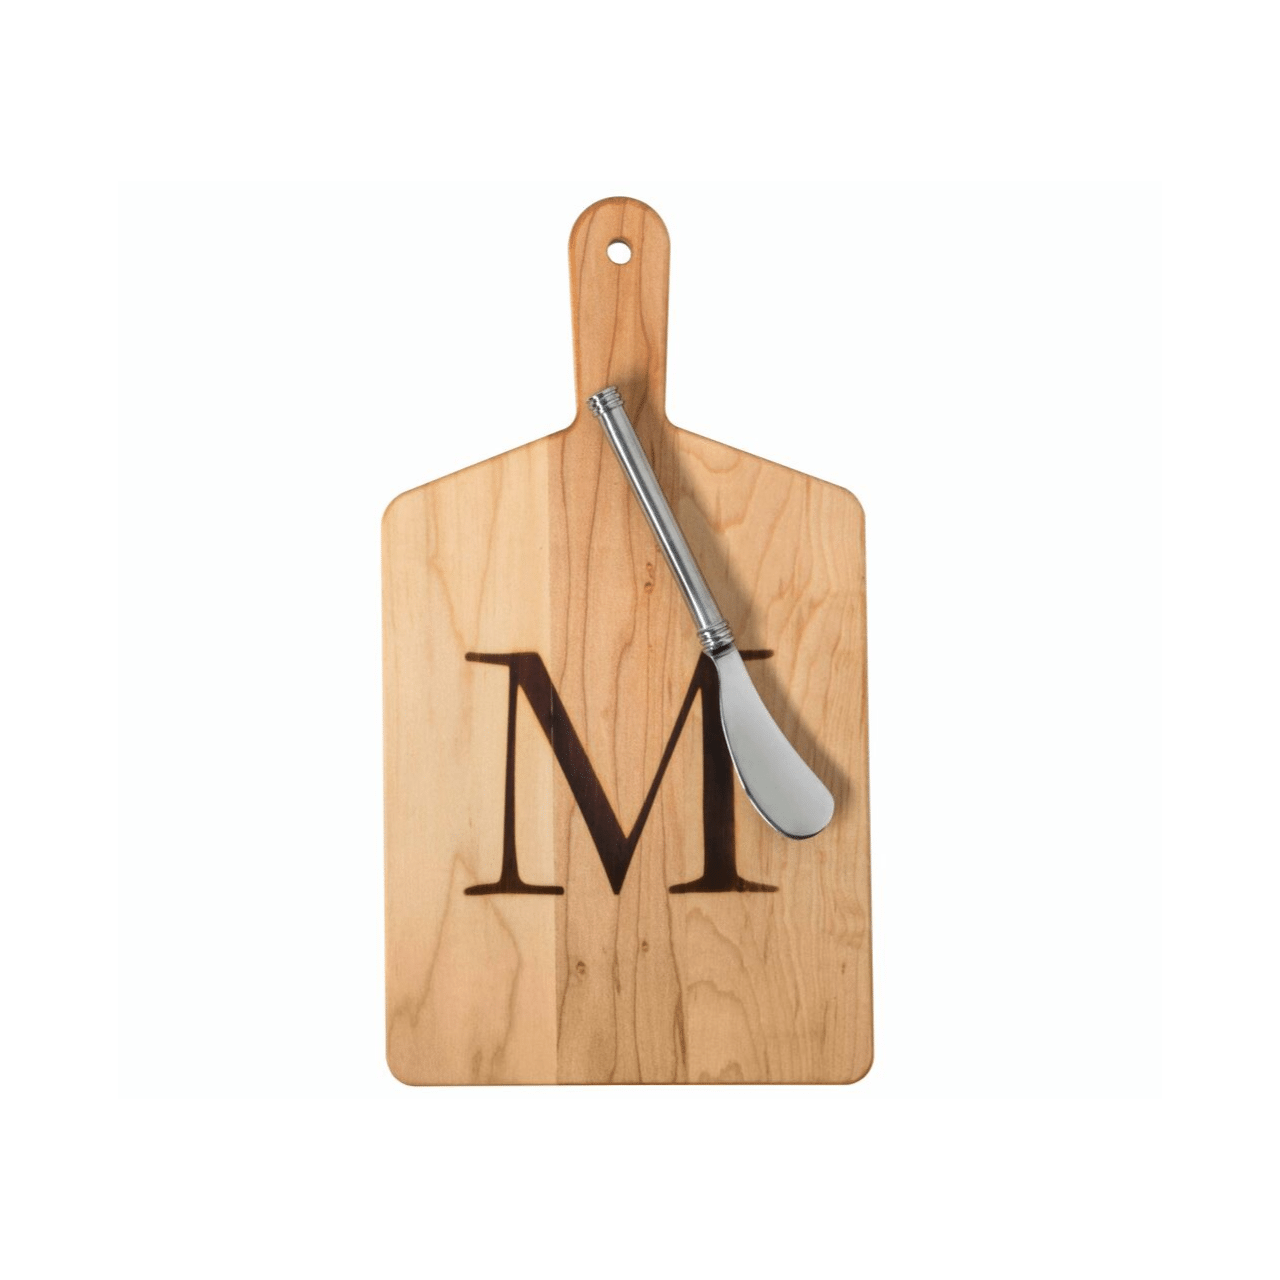 Maple Cheese Board with a Stamped S and Metal Spreader